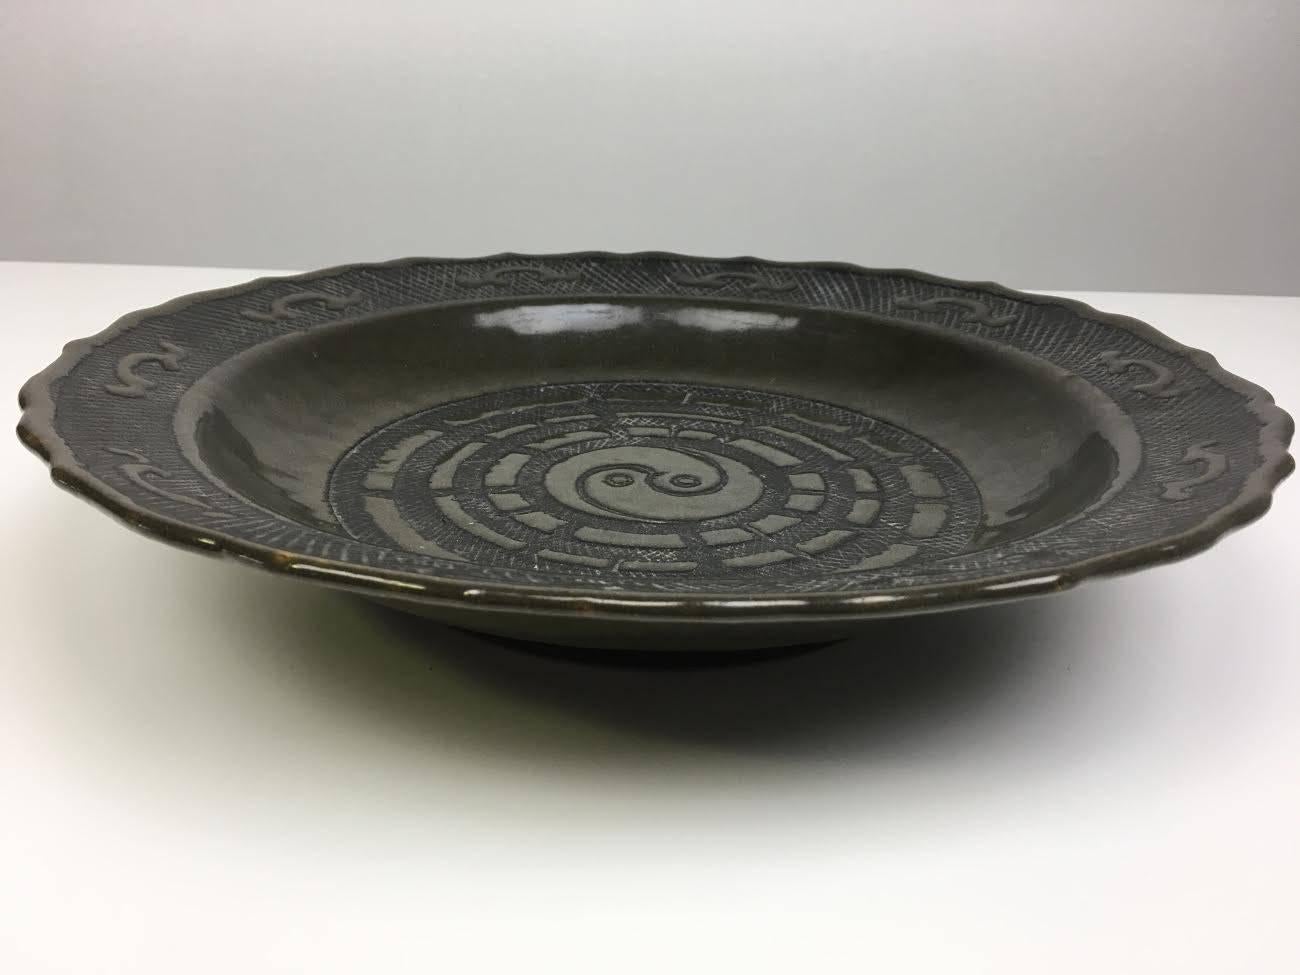 A very stunning glazed Chinese porcelain plate which features geometric patterns and a yin-yang symbol in low relief. The plate's faintly iridescent green color is apparently due to a very unusual and rare tea dust glaze. The charger/ plate was